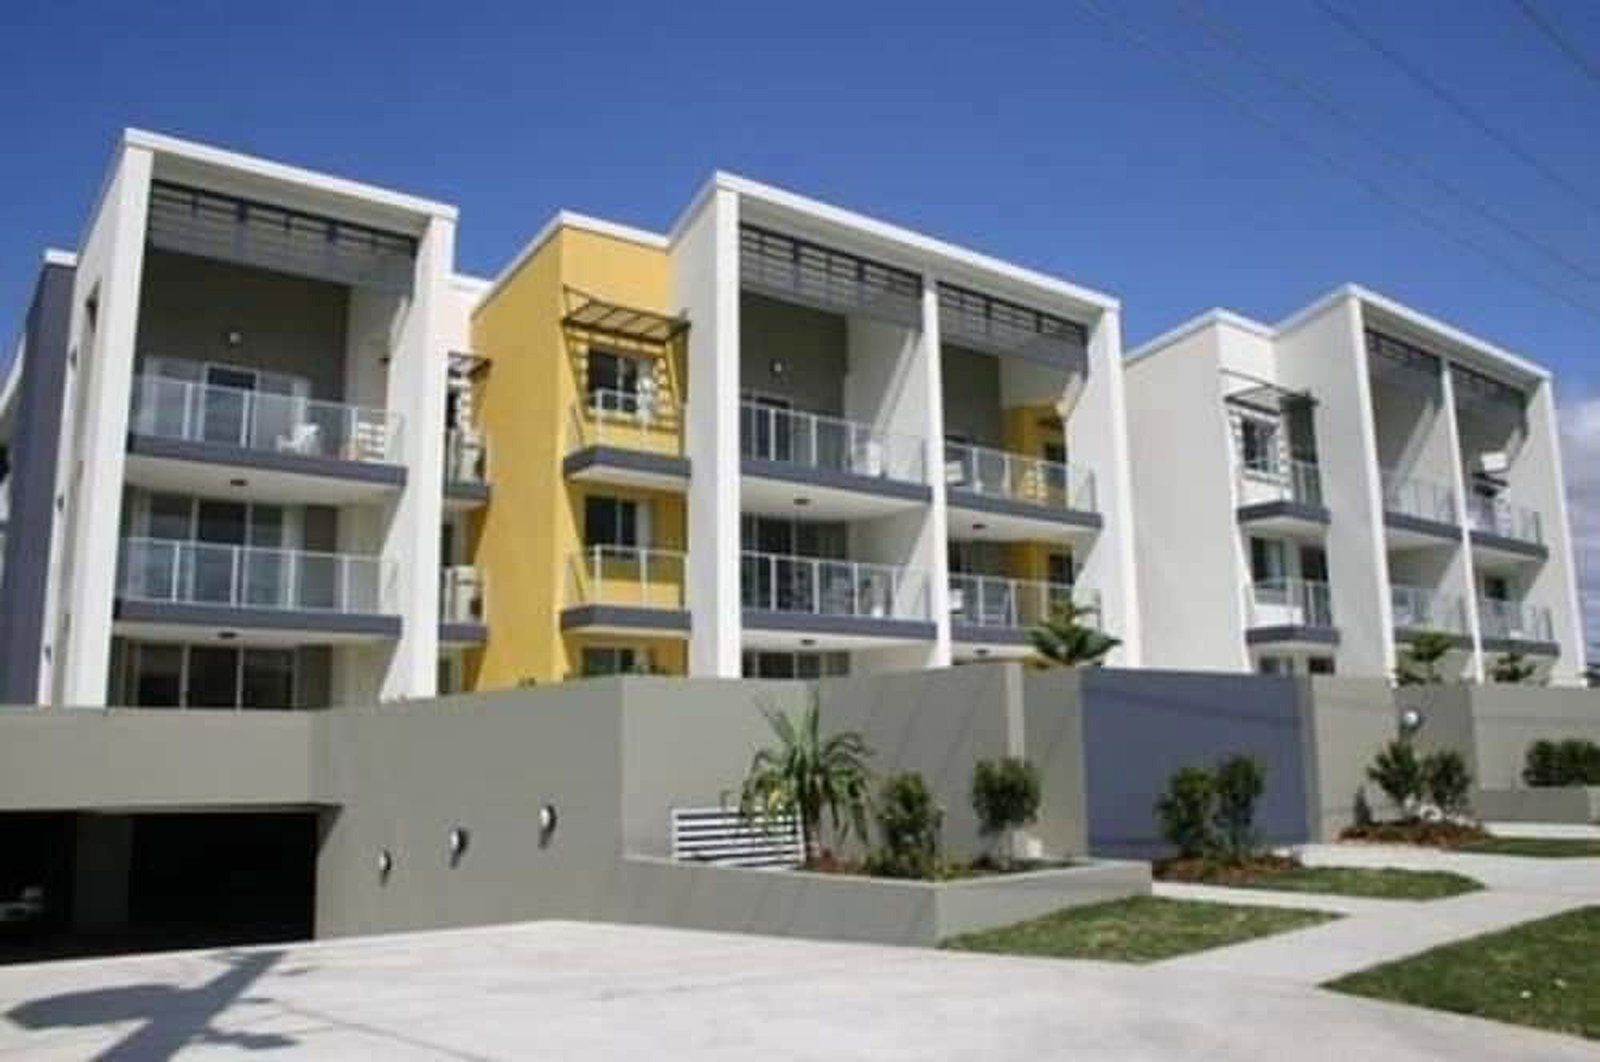 Pacific Fair QLD Accommodation Search